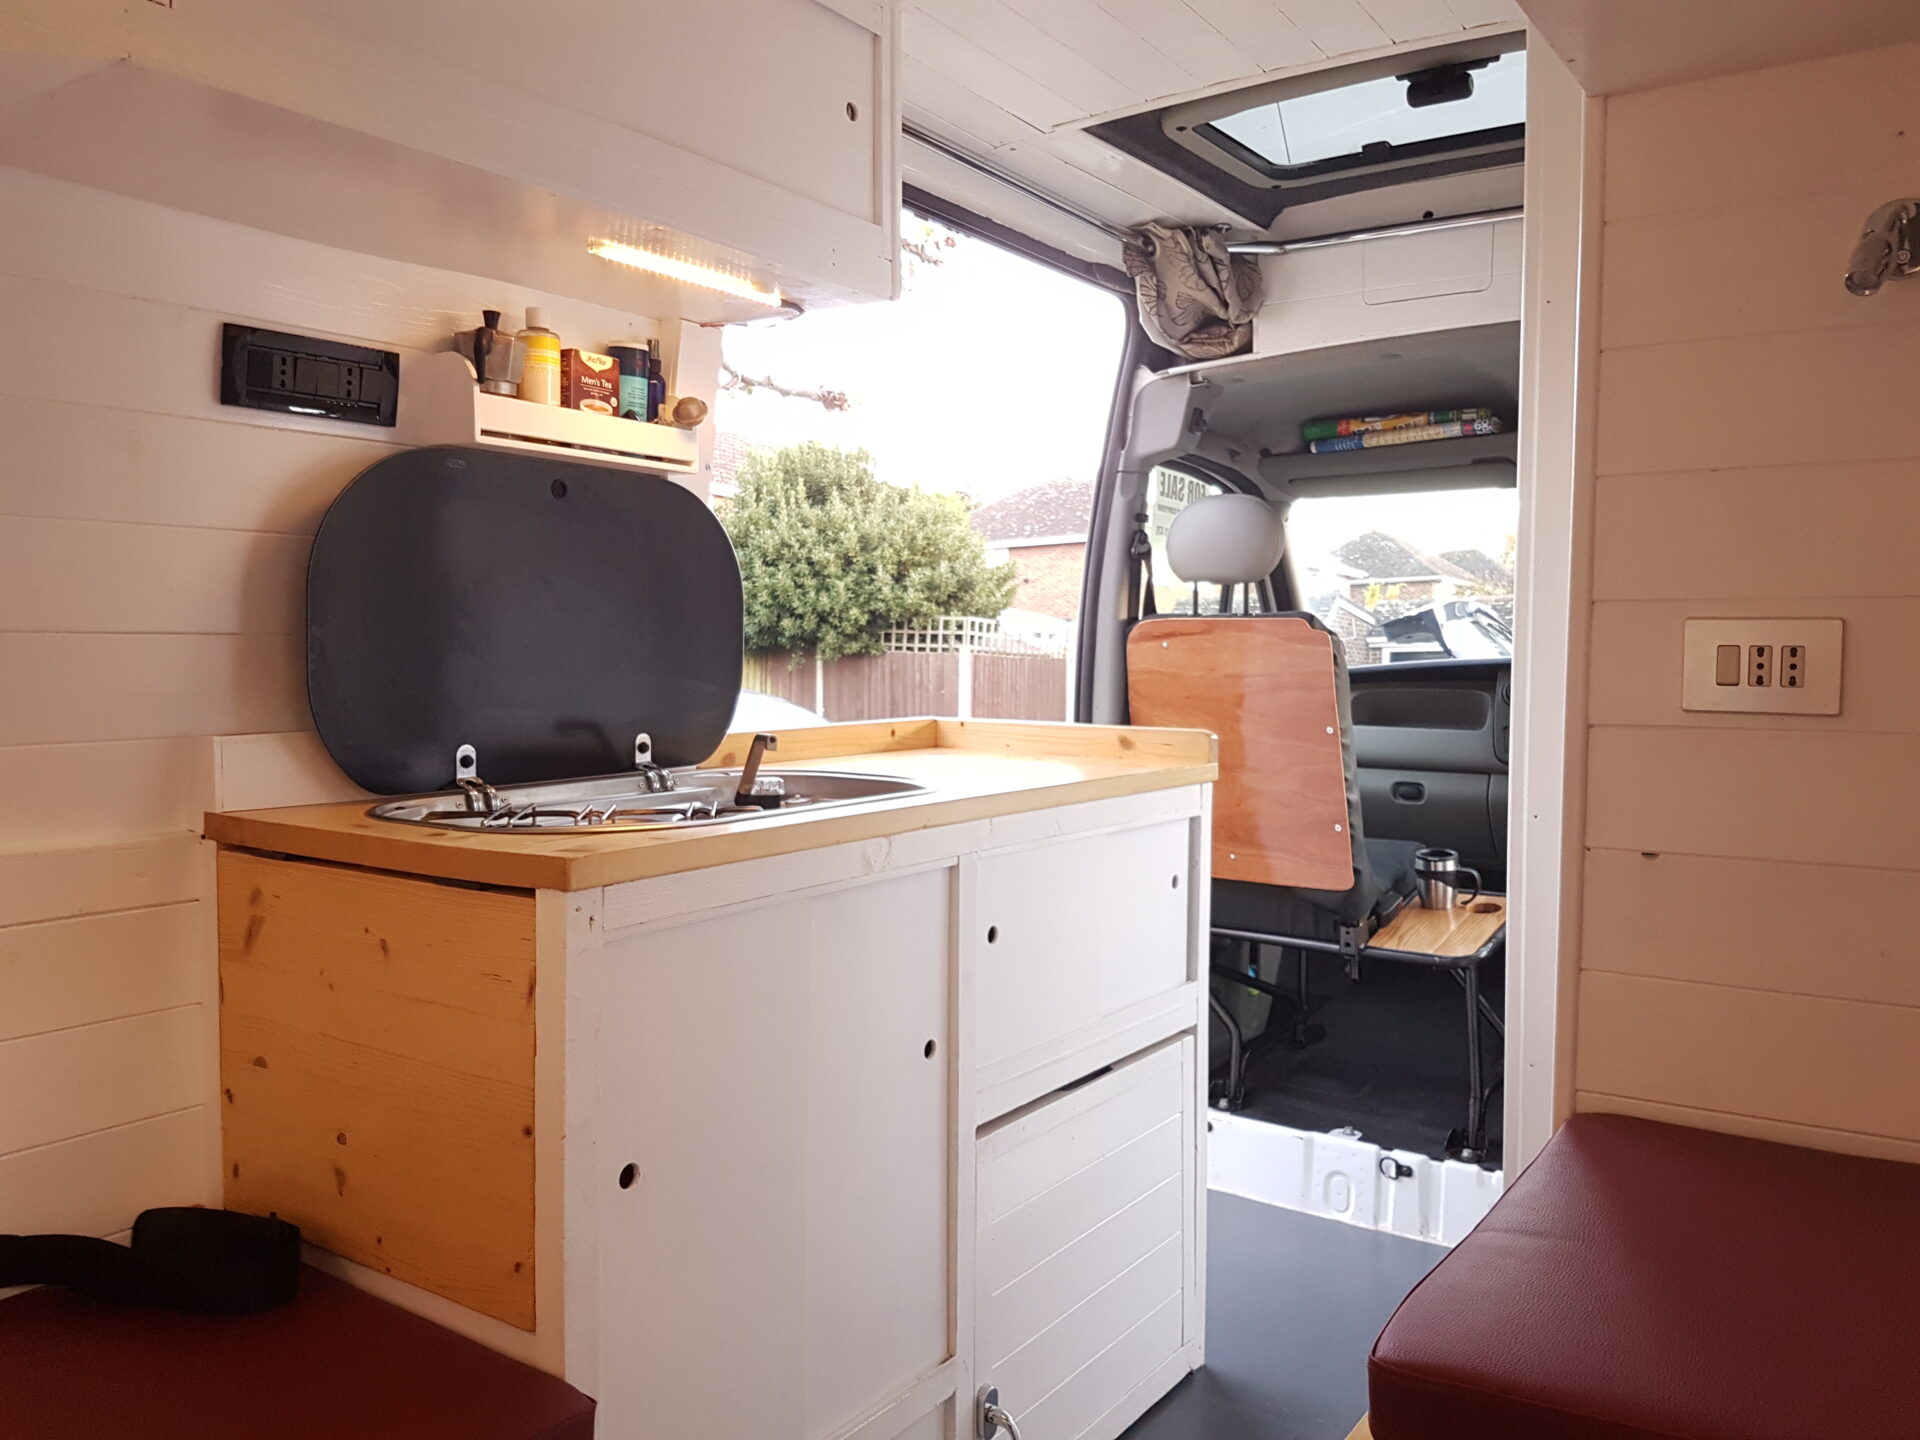 Do I qualify to hire your campervan?